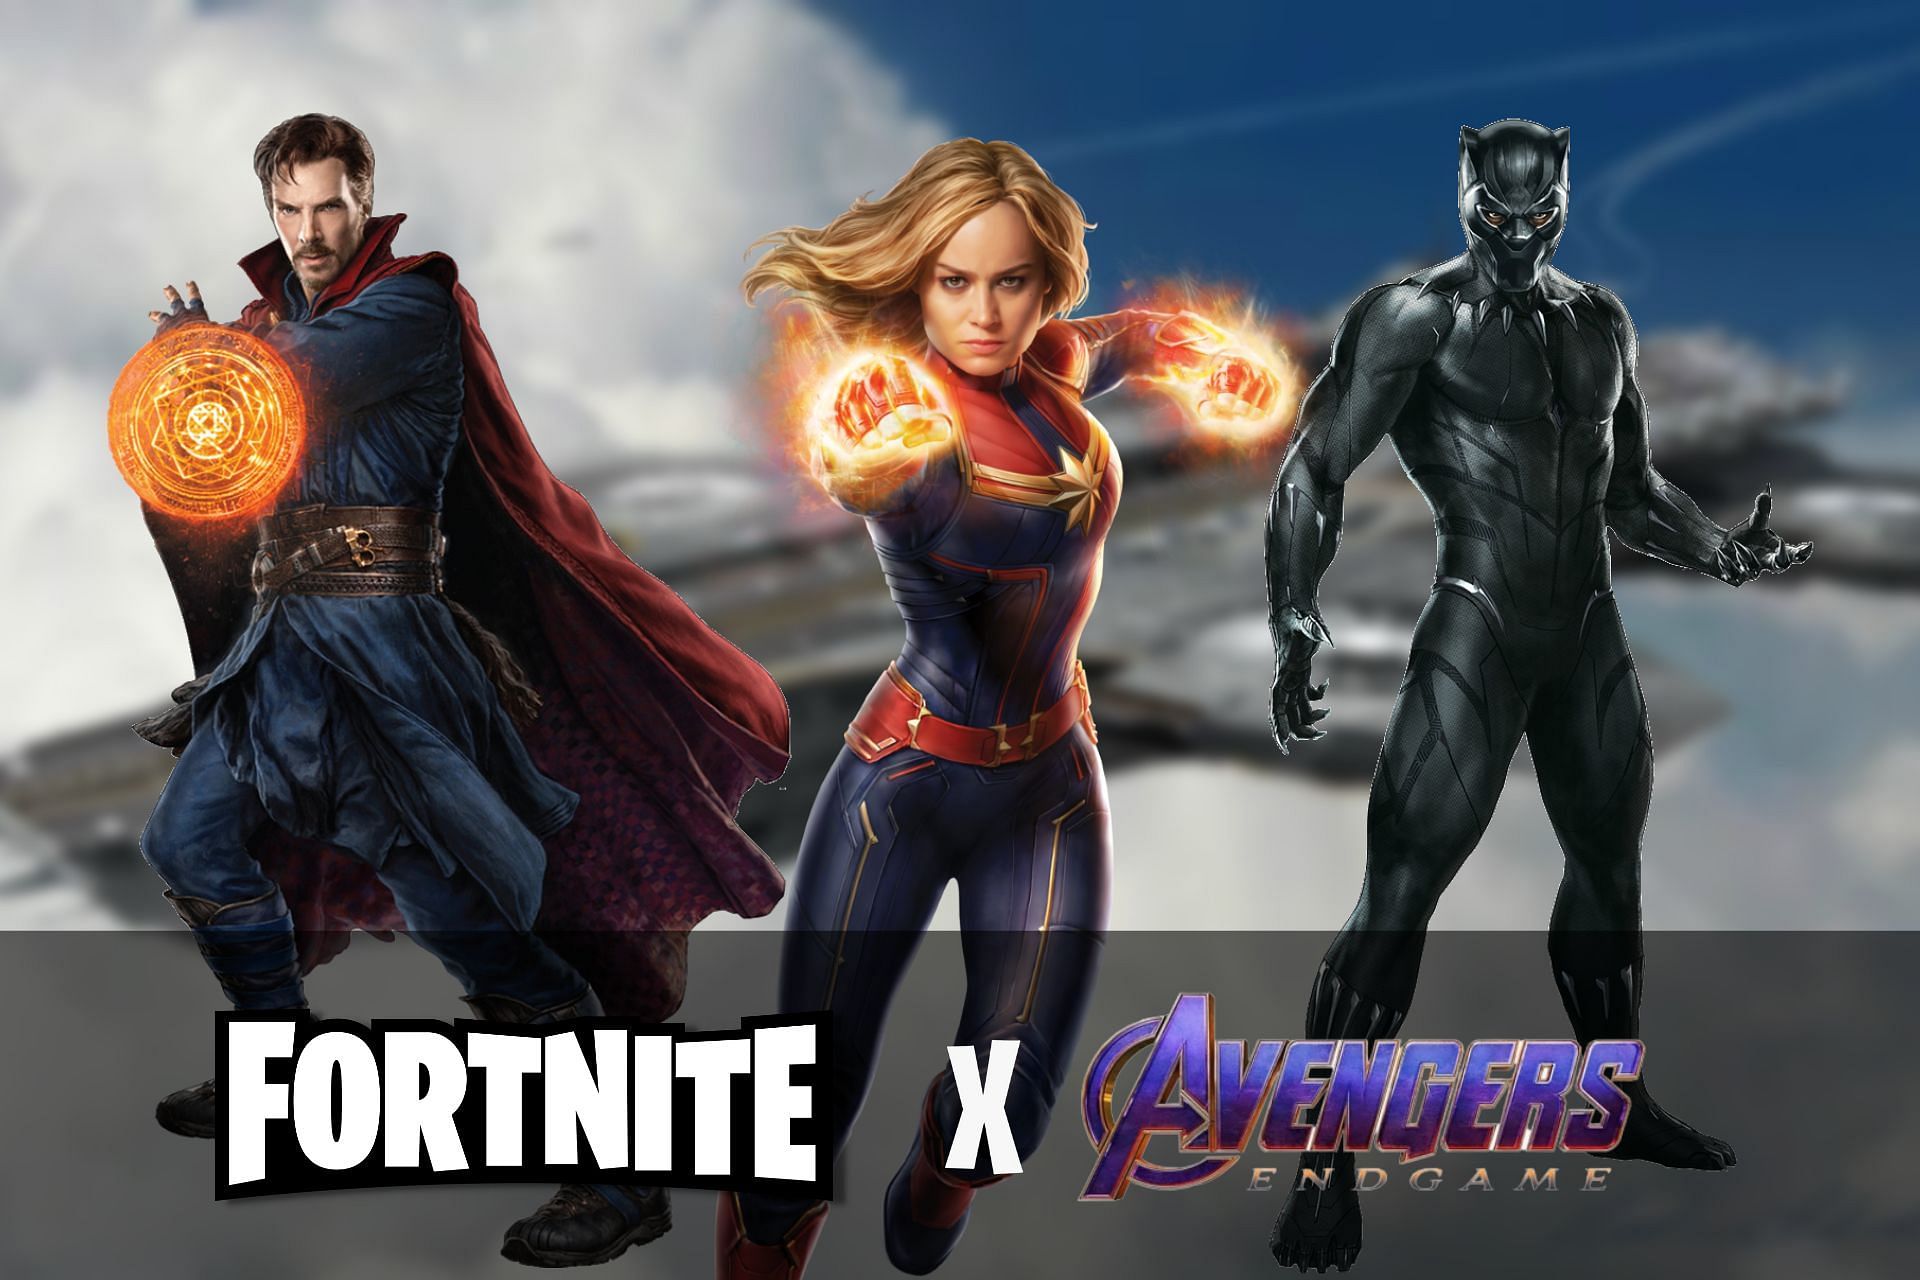 Avengers Endgame x Fortnite is one of the best promotional stunts any video game has pulled off in the longest time (Image via Sportskeeda)